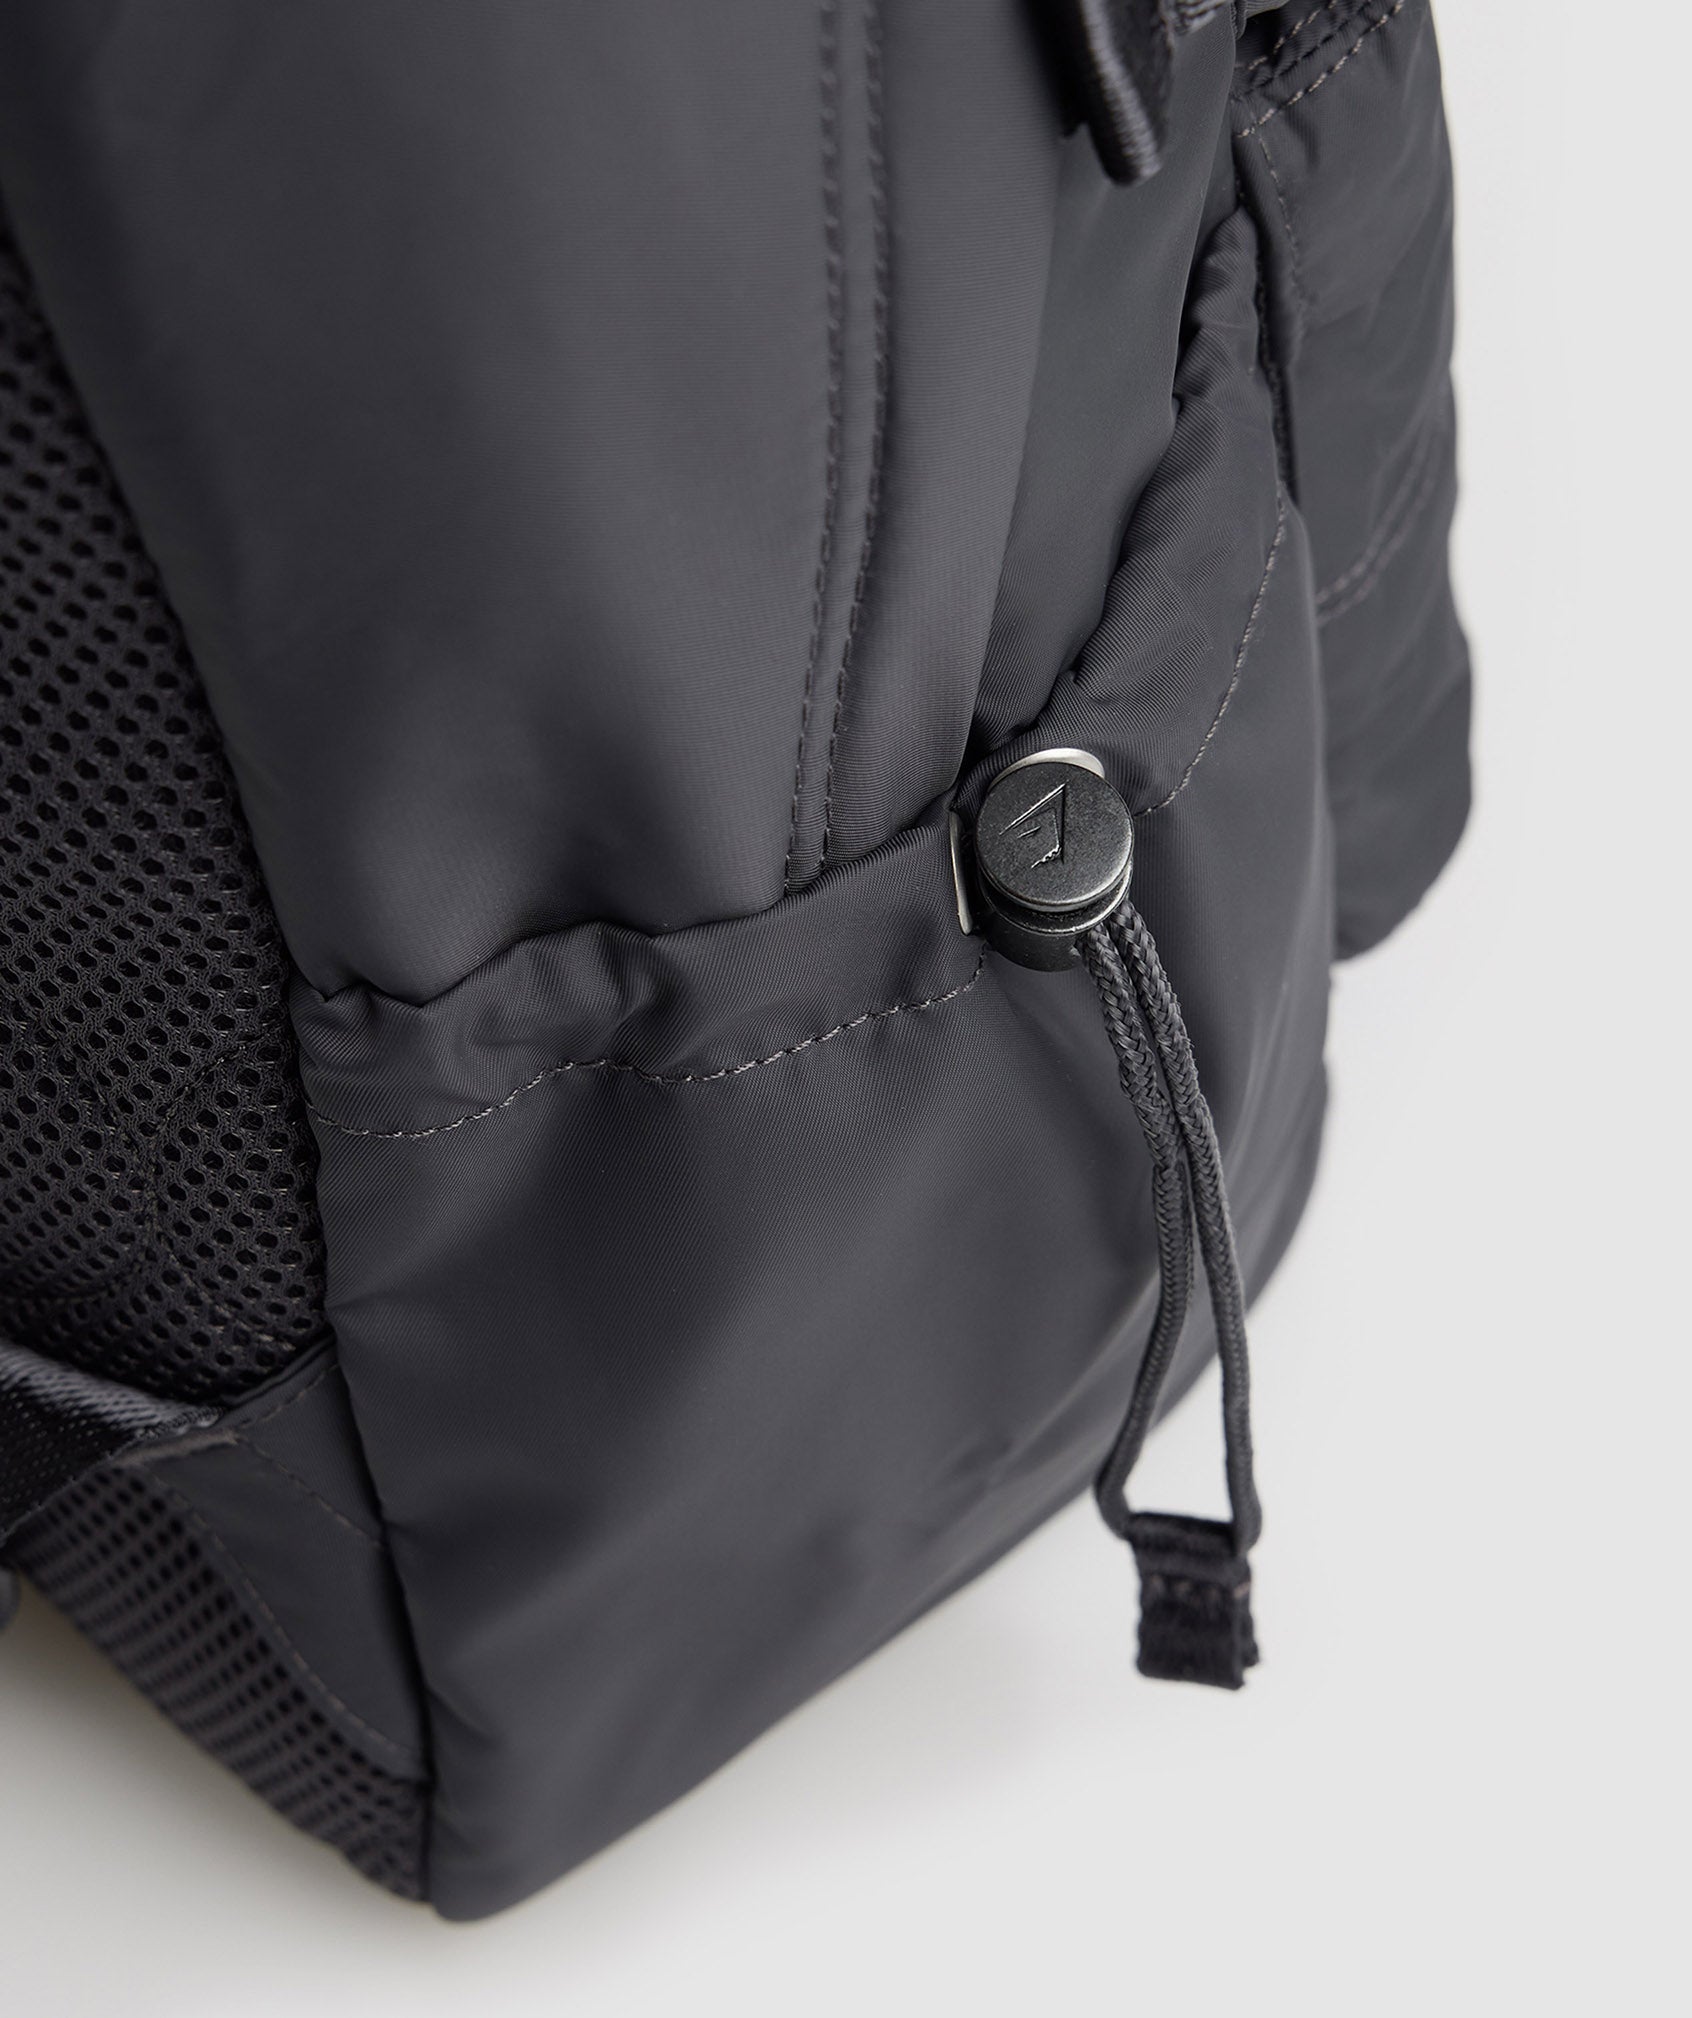 Lifestyle Backpack in Onyx Grey - view 6